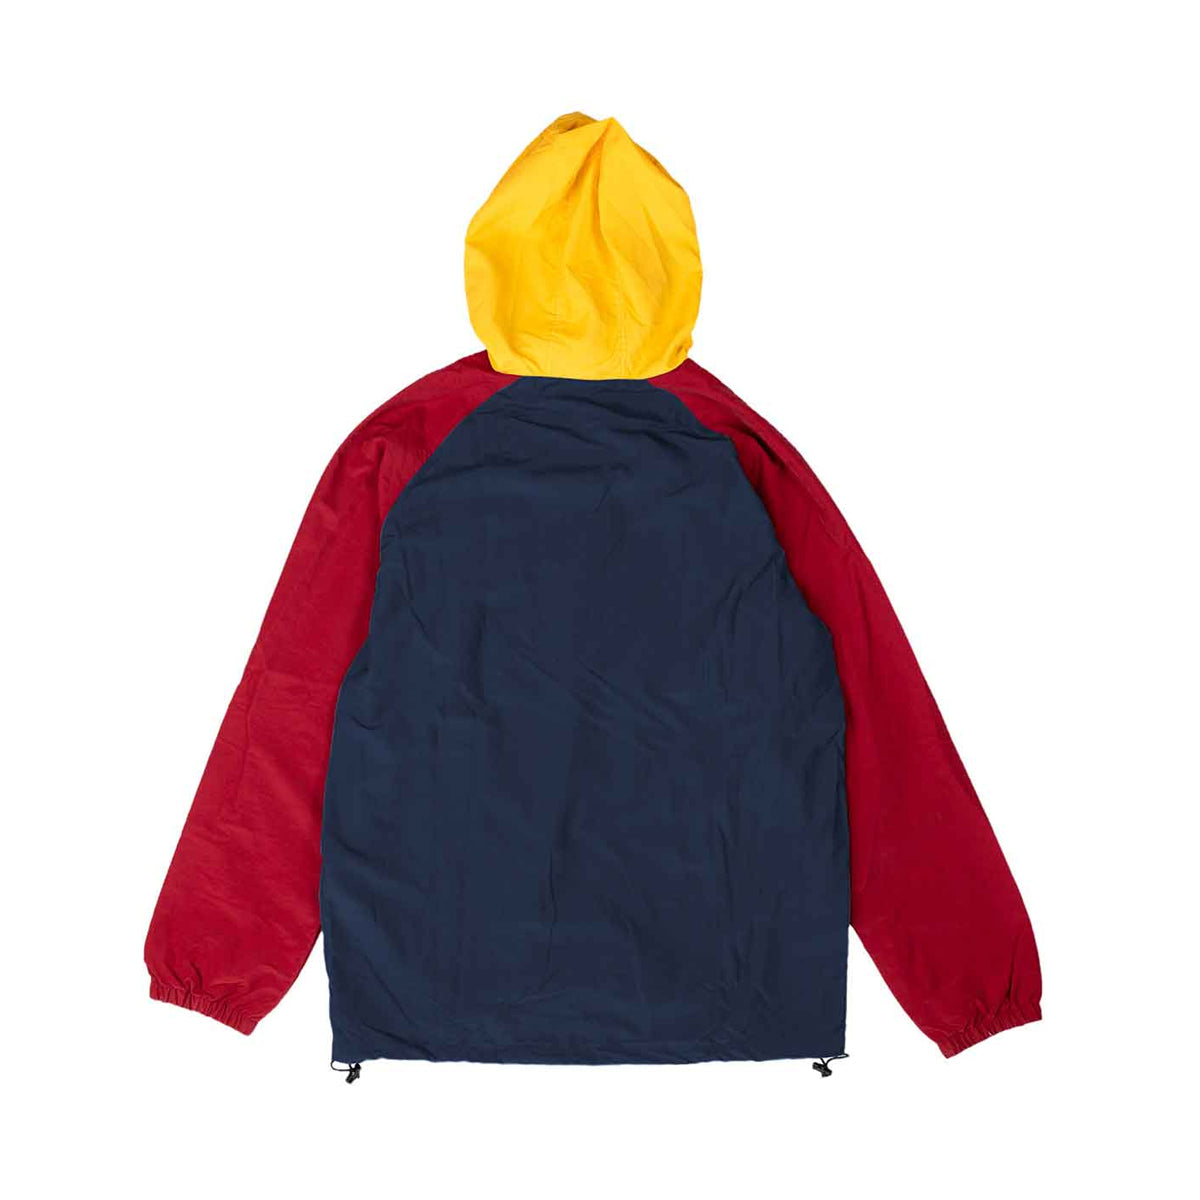 Spitfire Classic 87 Hooded 1/4 Zip Pullover Jacket (Navy/Gold/Red) - Apple Valley Emporium